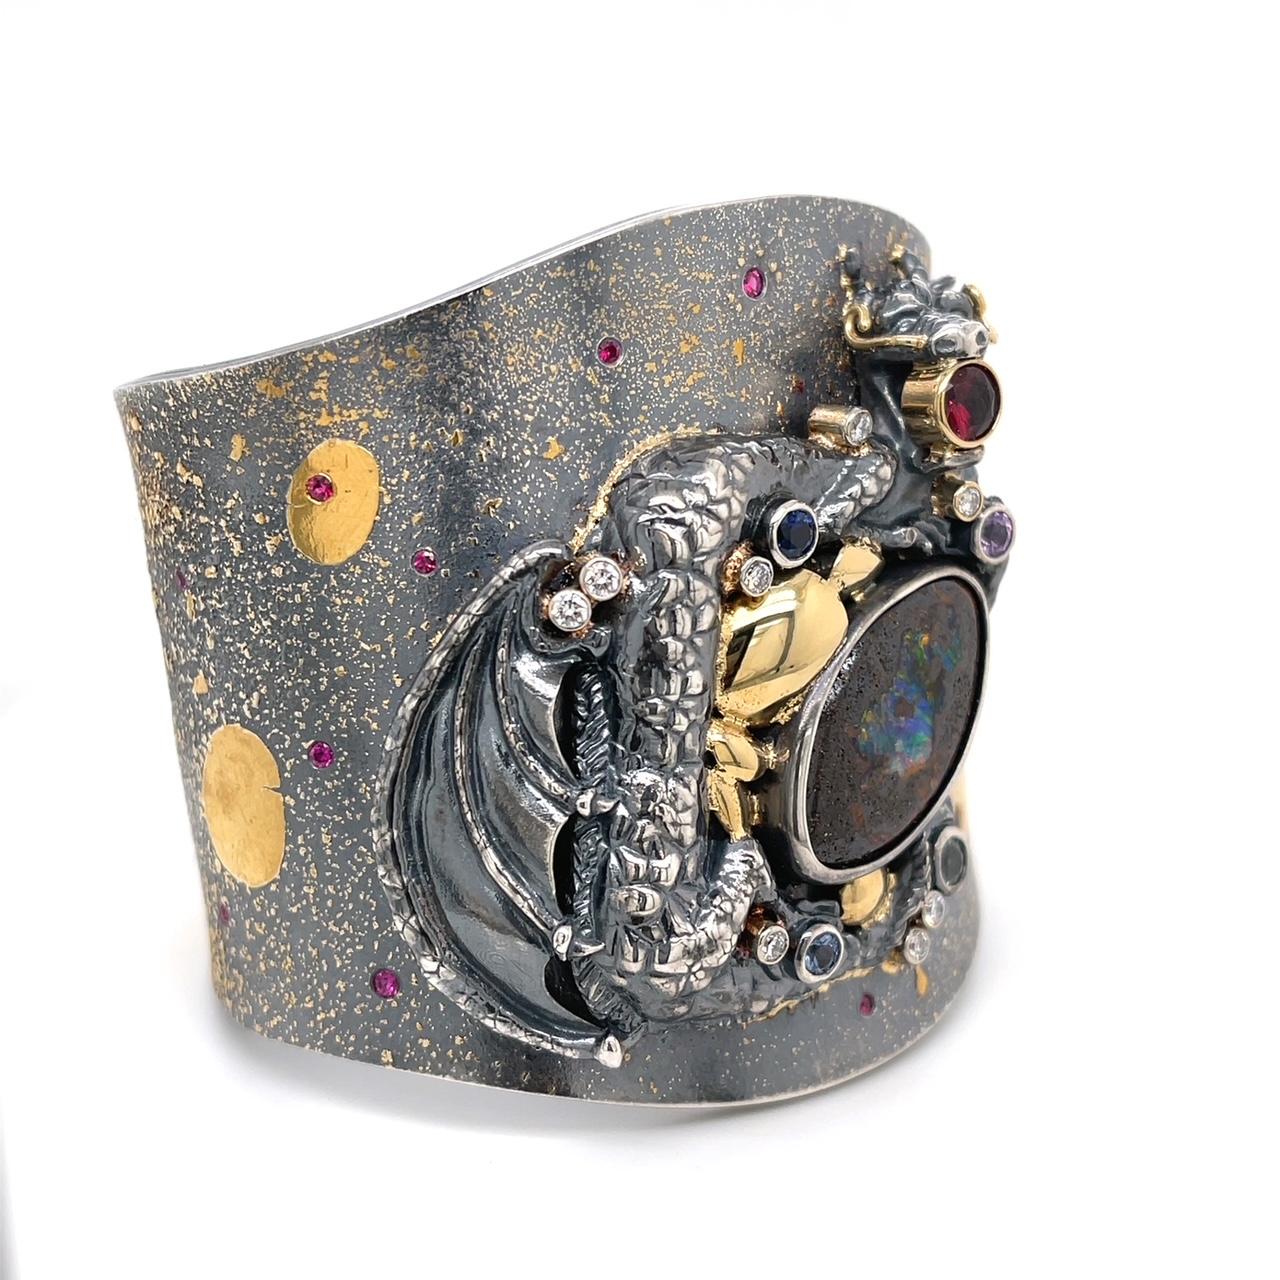 An oxidized sterling silver, 18k and 22k yellow gold dragon cuff set with one 14.46 carat oval boulder opal, .66 carats of round rubies, .21 carats of diamonds, .61 carats of blue, pink, and green sapphires, and one round .85 carat 5.5mm pyrope